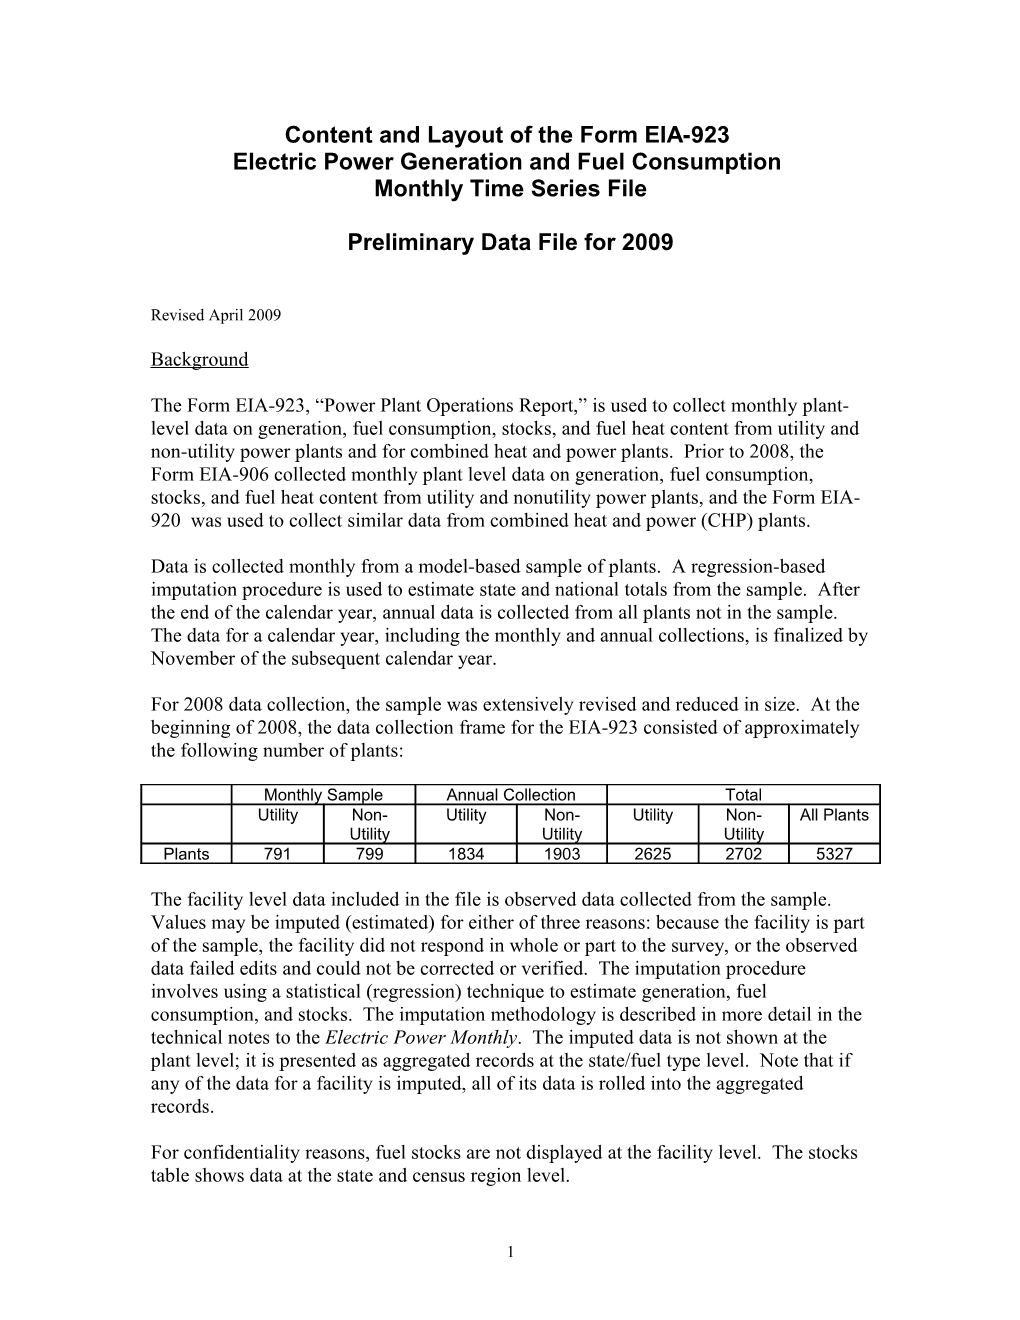 Content and Layout of the EIA-906 Monthly Time Series File